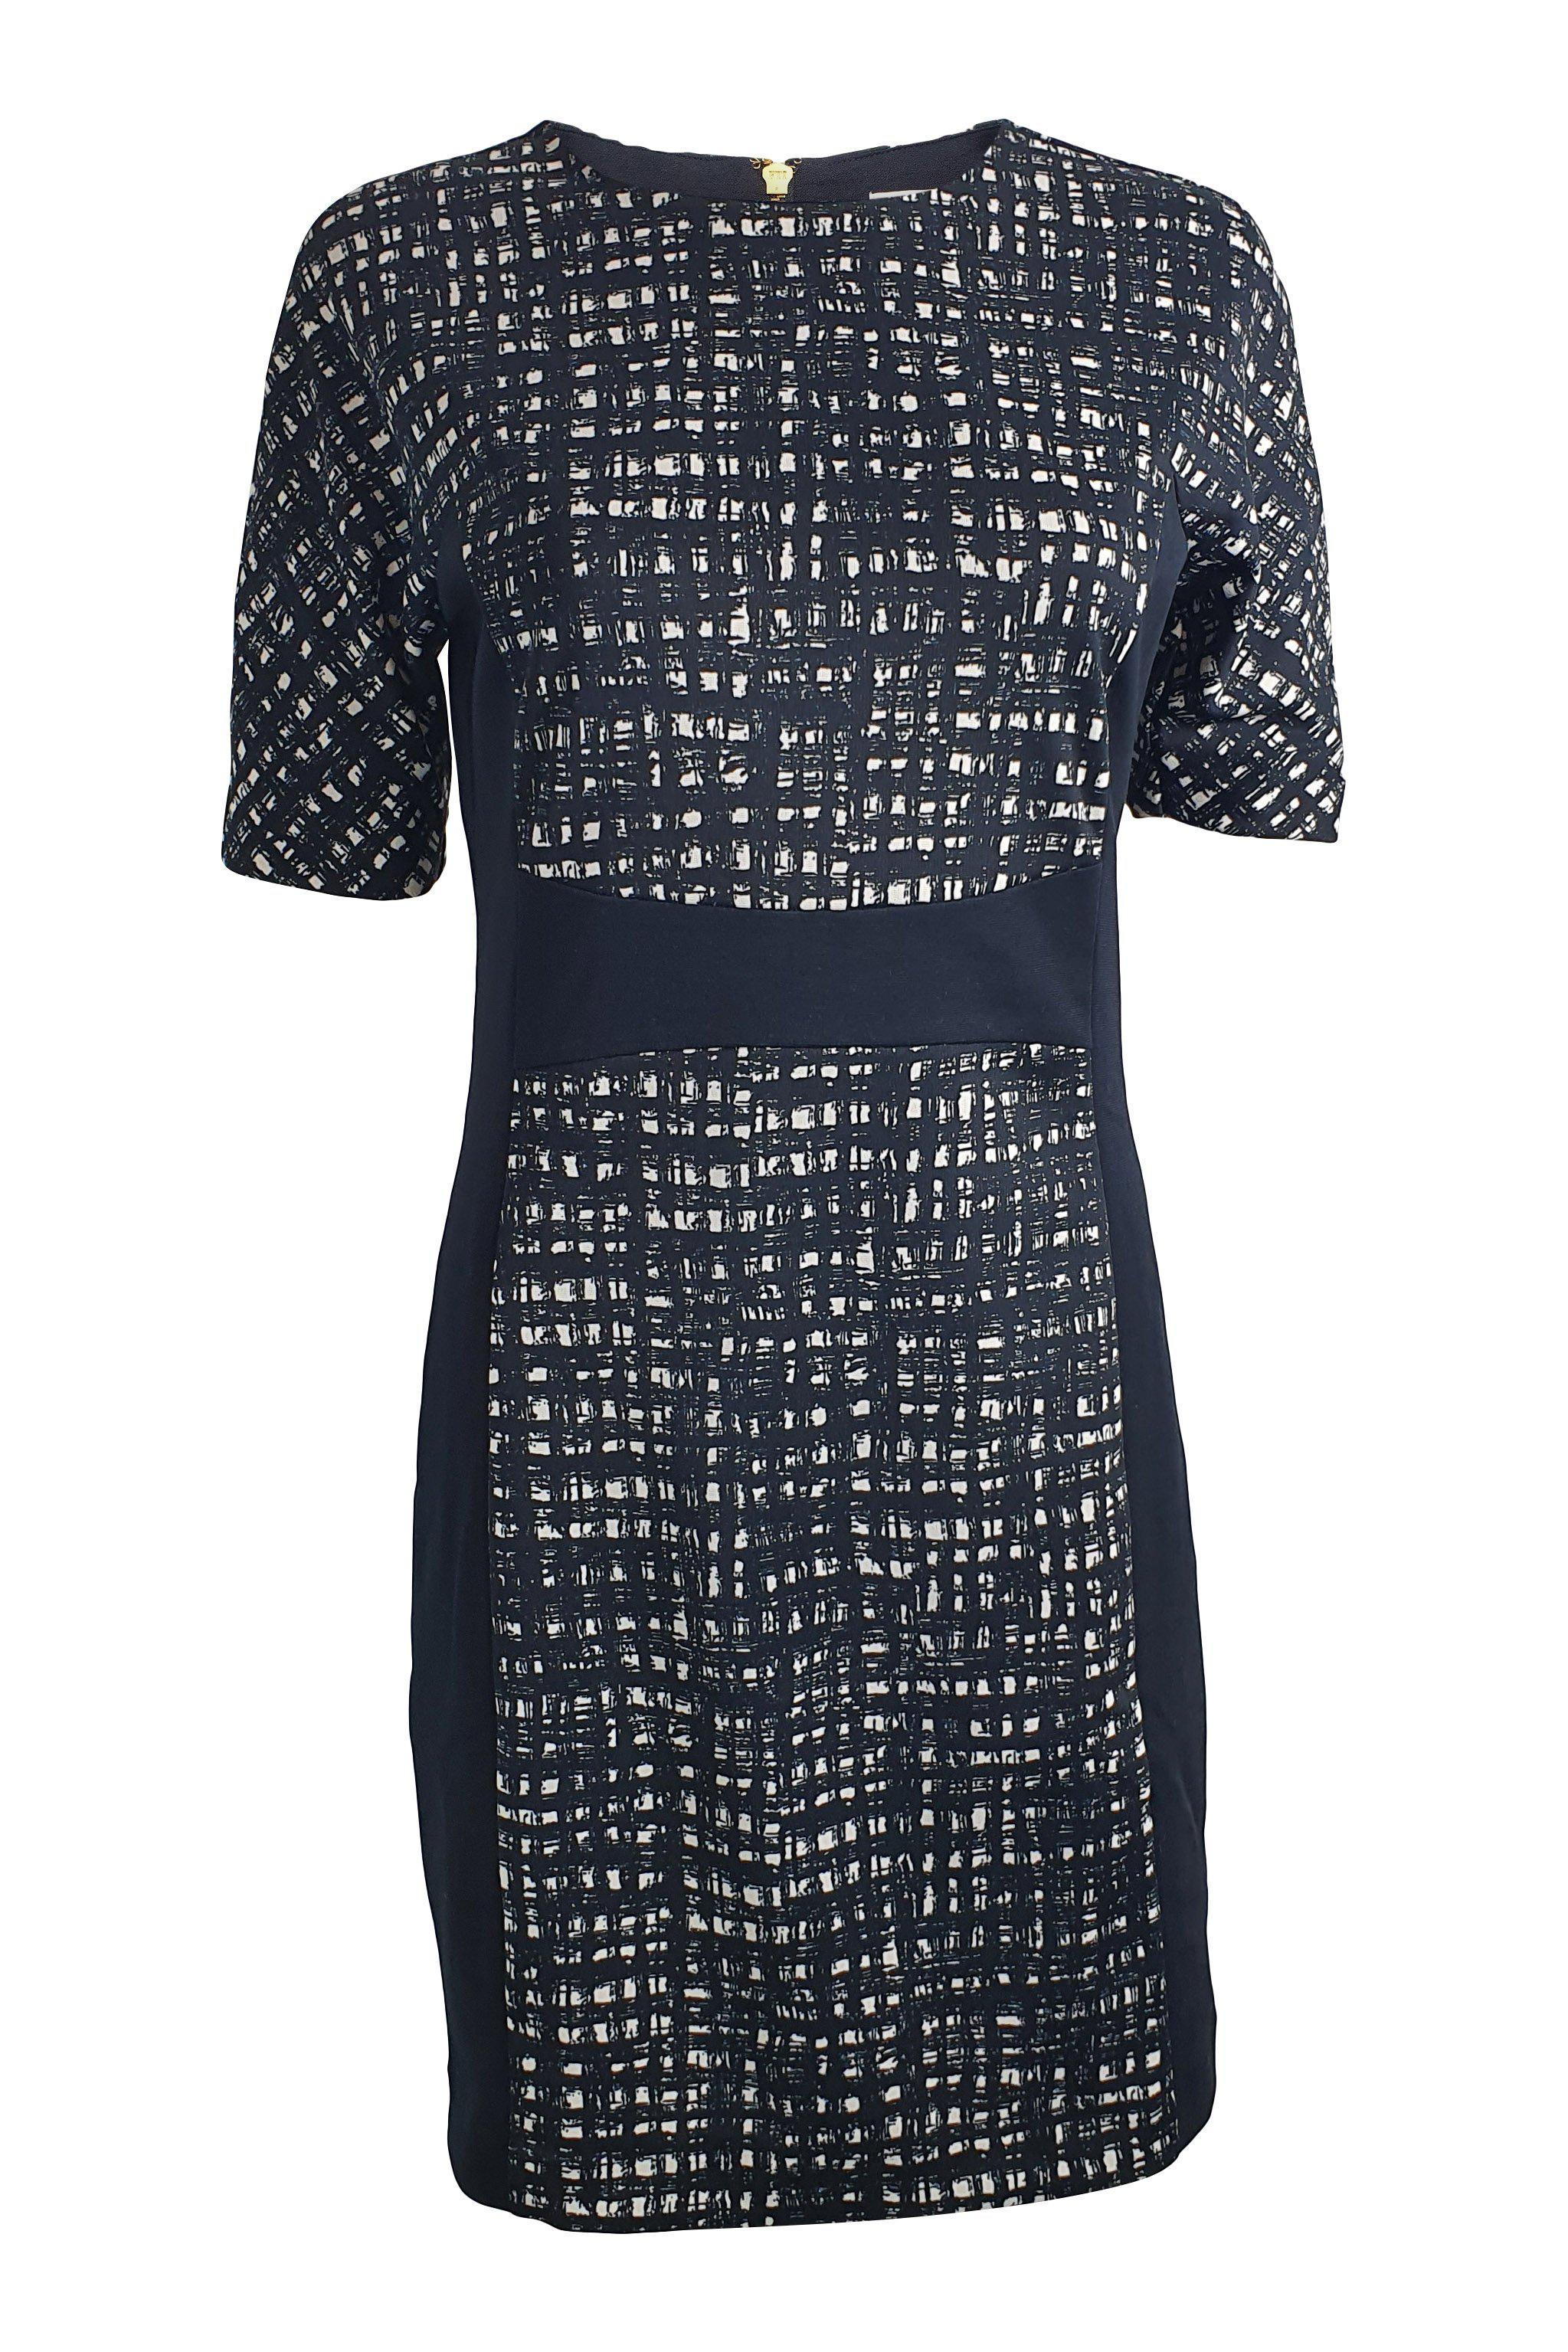 MICHAEL KORS Navy Blue Graphic Print Short Sleeved Shift Dress (US 4)-Allude-The Freperie